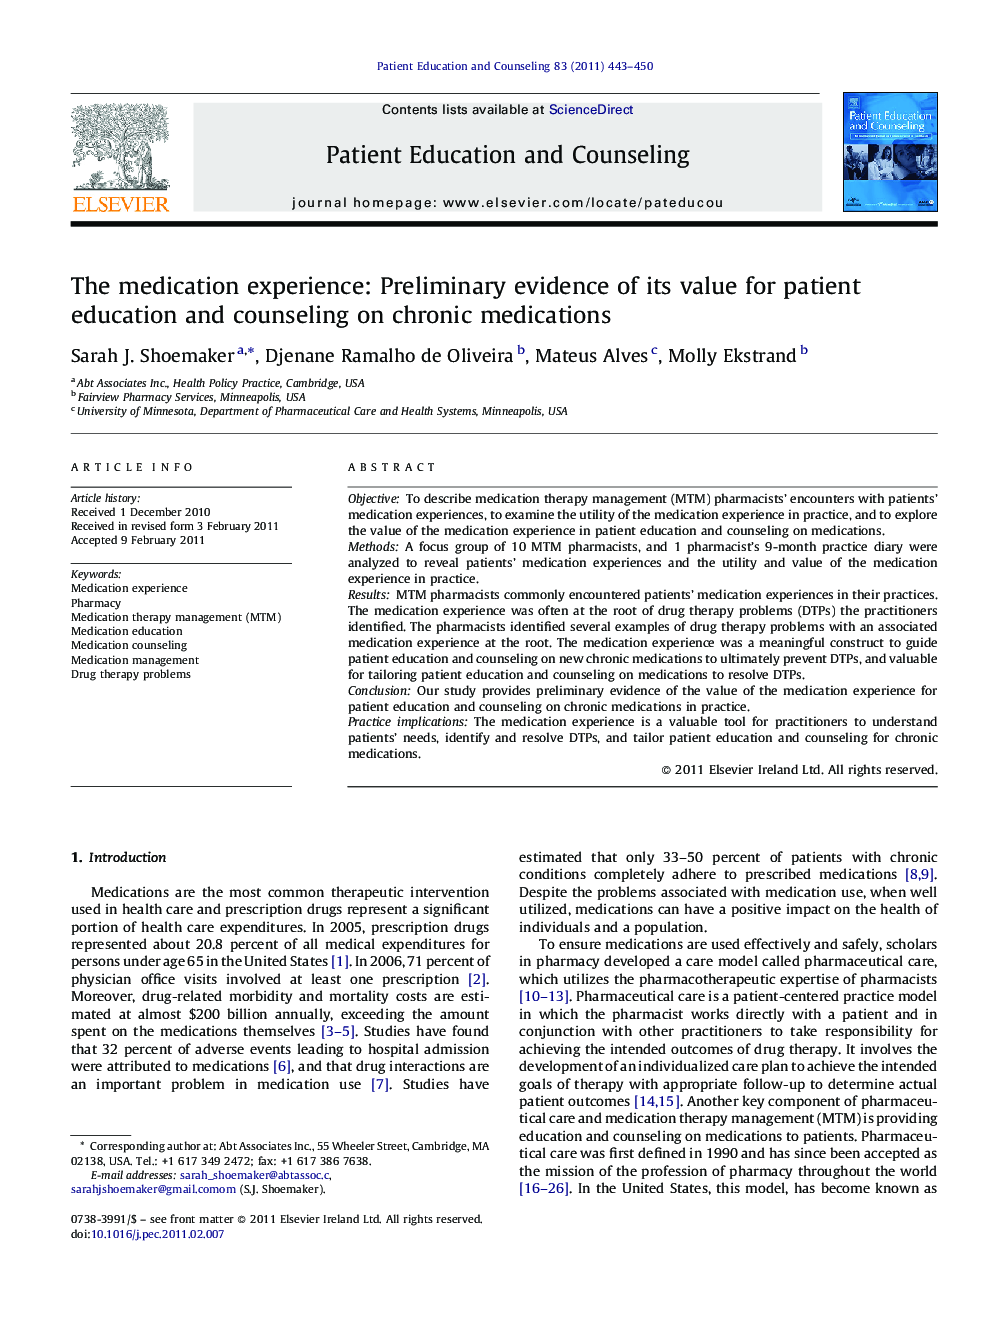 The medication experience: Preliminary evidence of its value for patient education and counseling on chronic medications